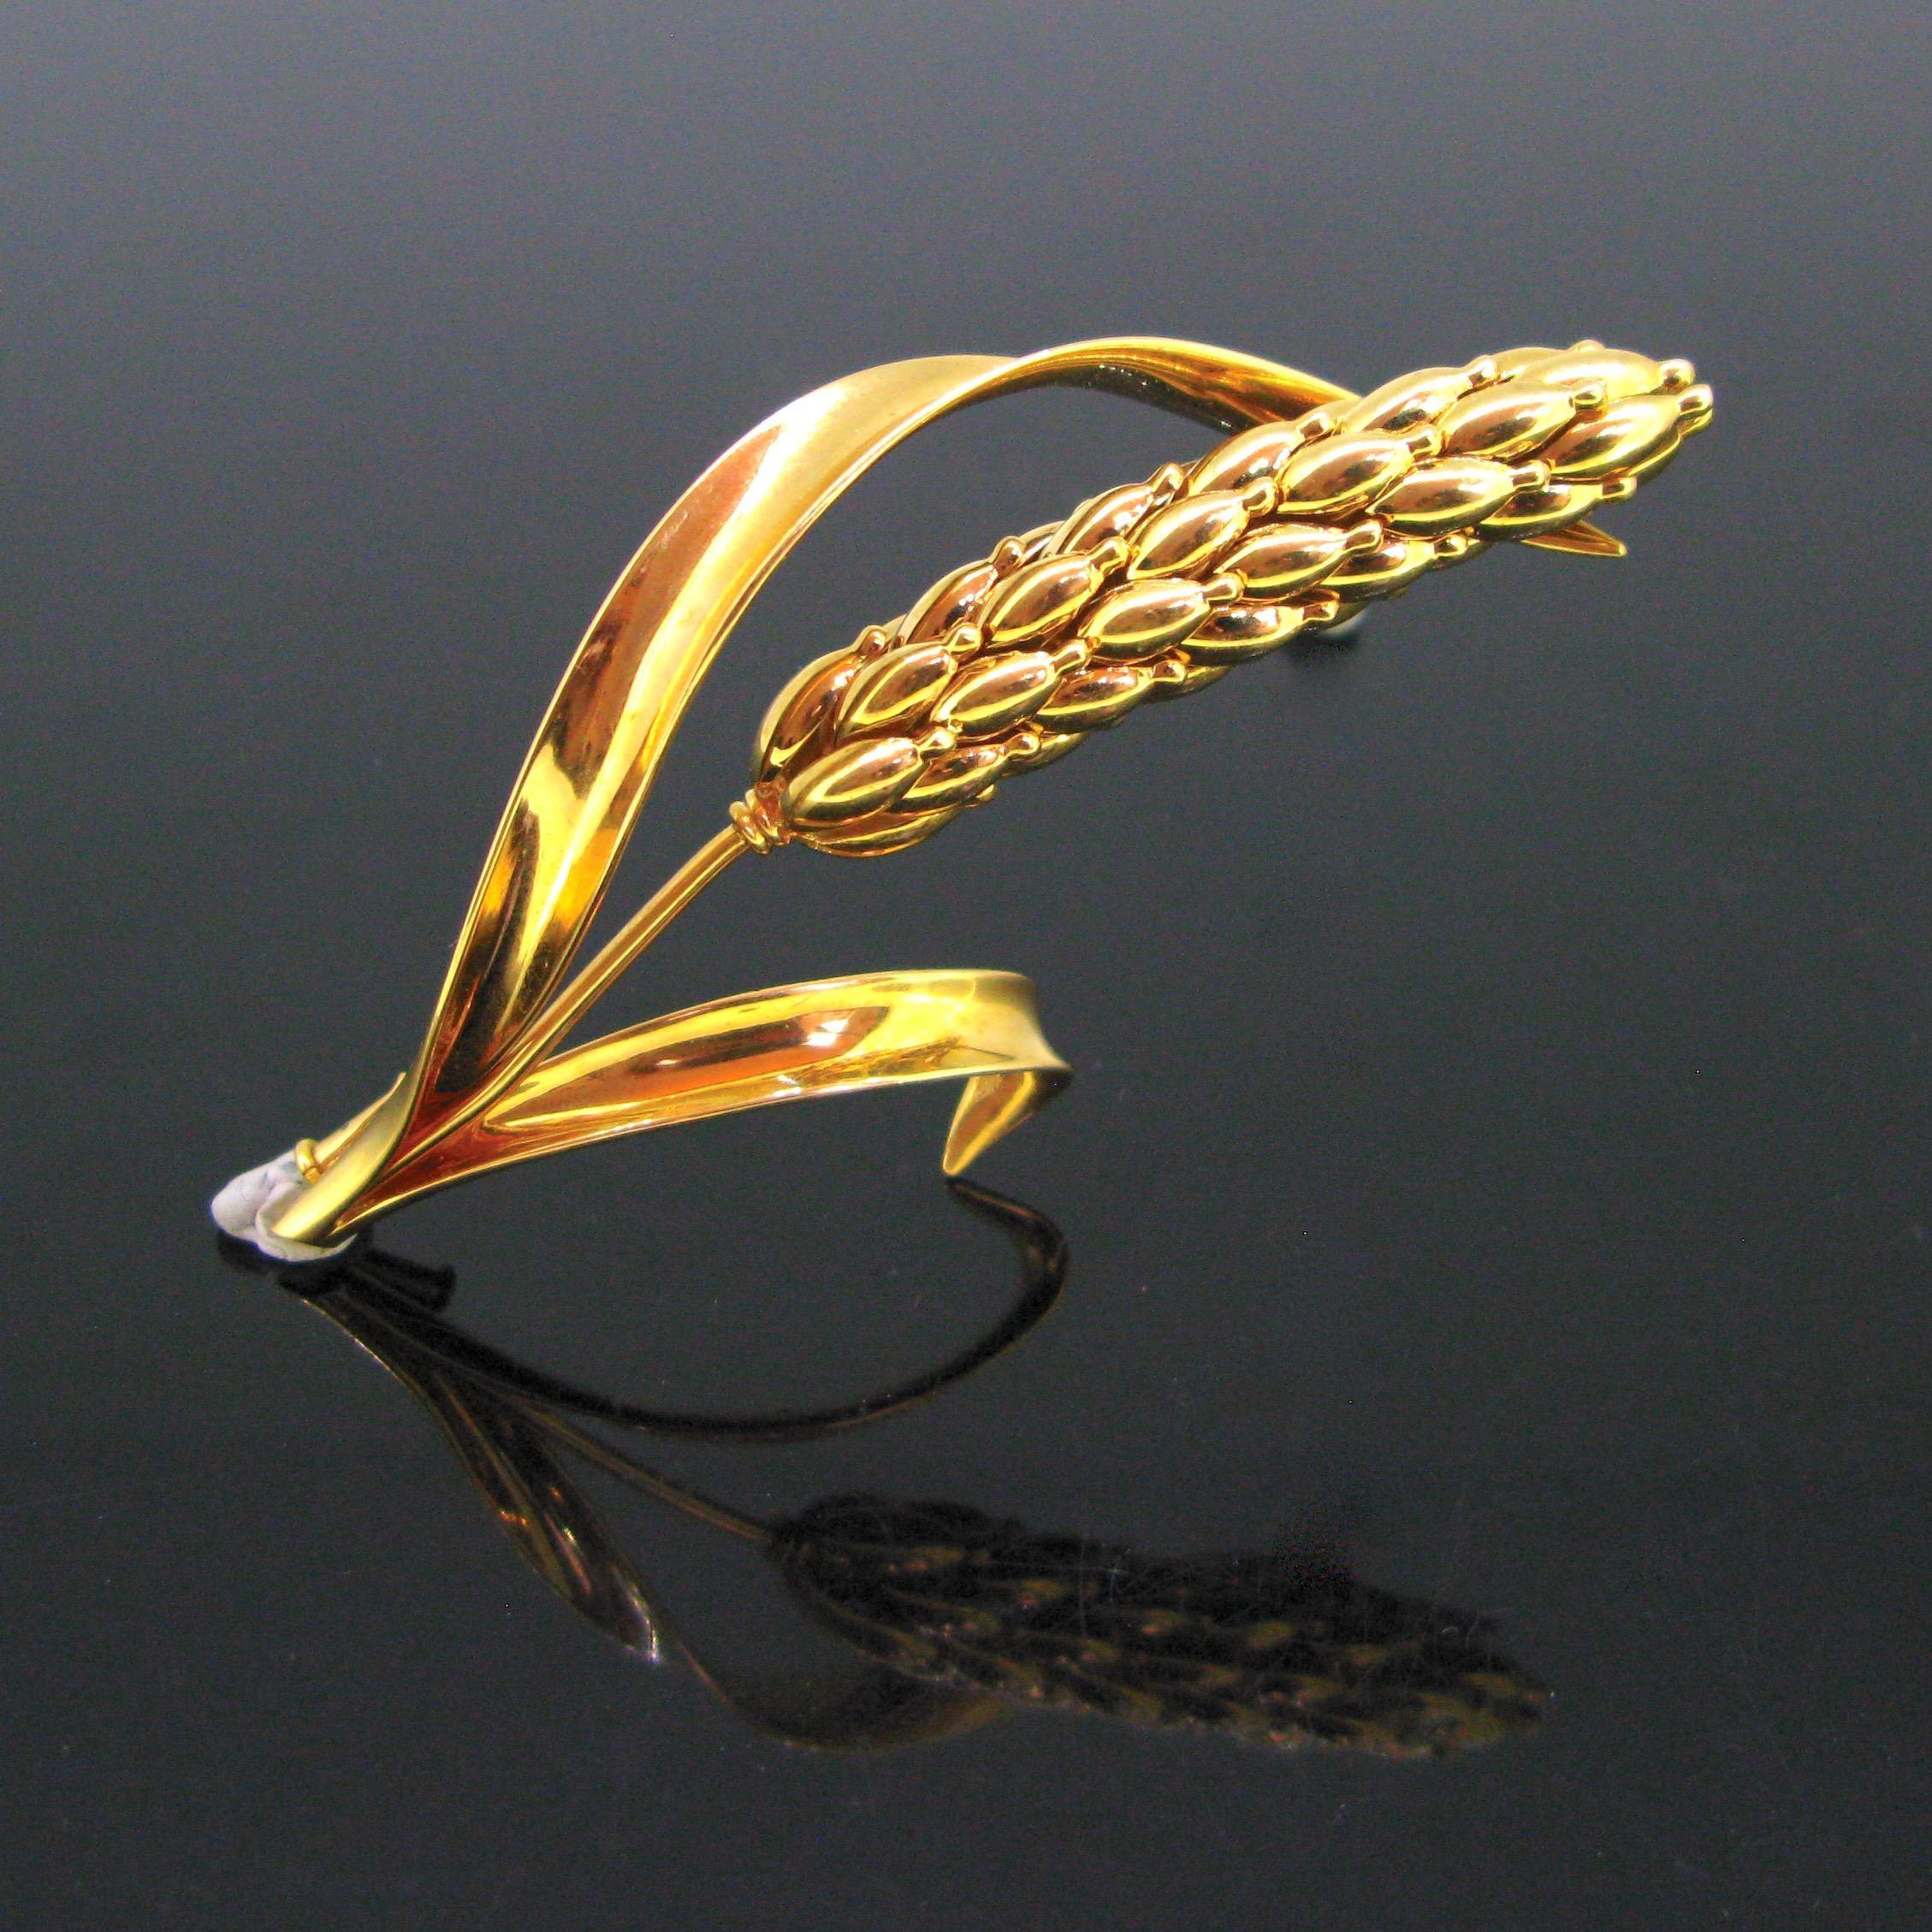 Weight:	23gr


Metal:	18kt yellow gold 


Condition:	Very Good


Hallmarks:	French, the eagle’s head
			Maker’s mark: E / horseshoe/ B


Comments:	This lovely sheaf of wheat pin brooch is from the Retro era, circa 1950. It is made in 18kt yellow